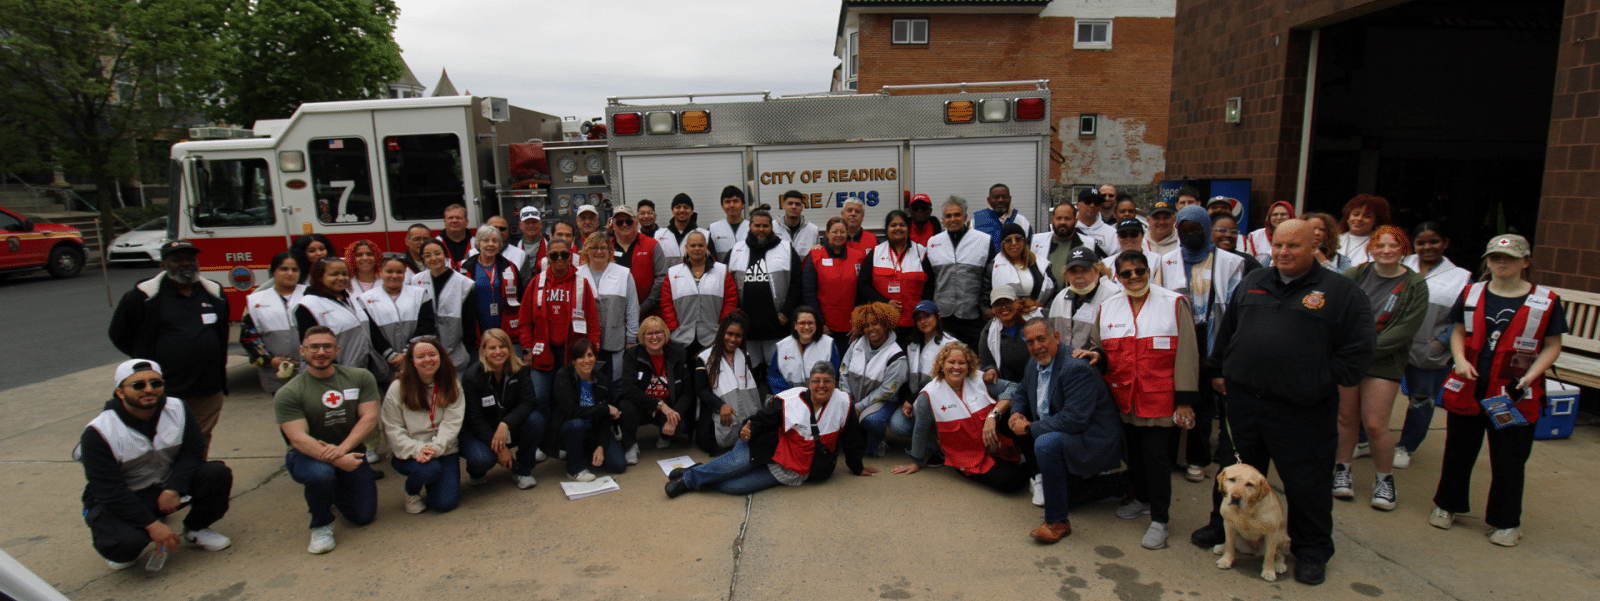 Sound The Alarm volunteers in front of a Reading Fire Truck